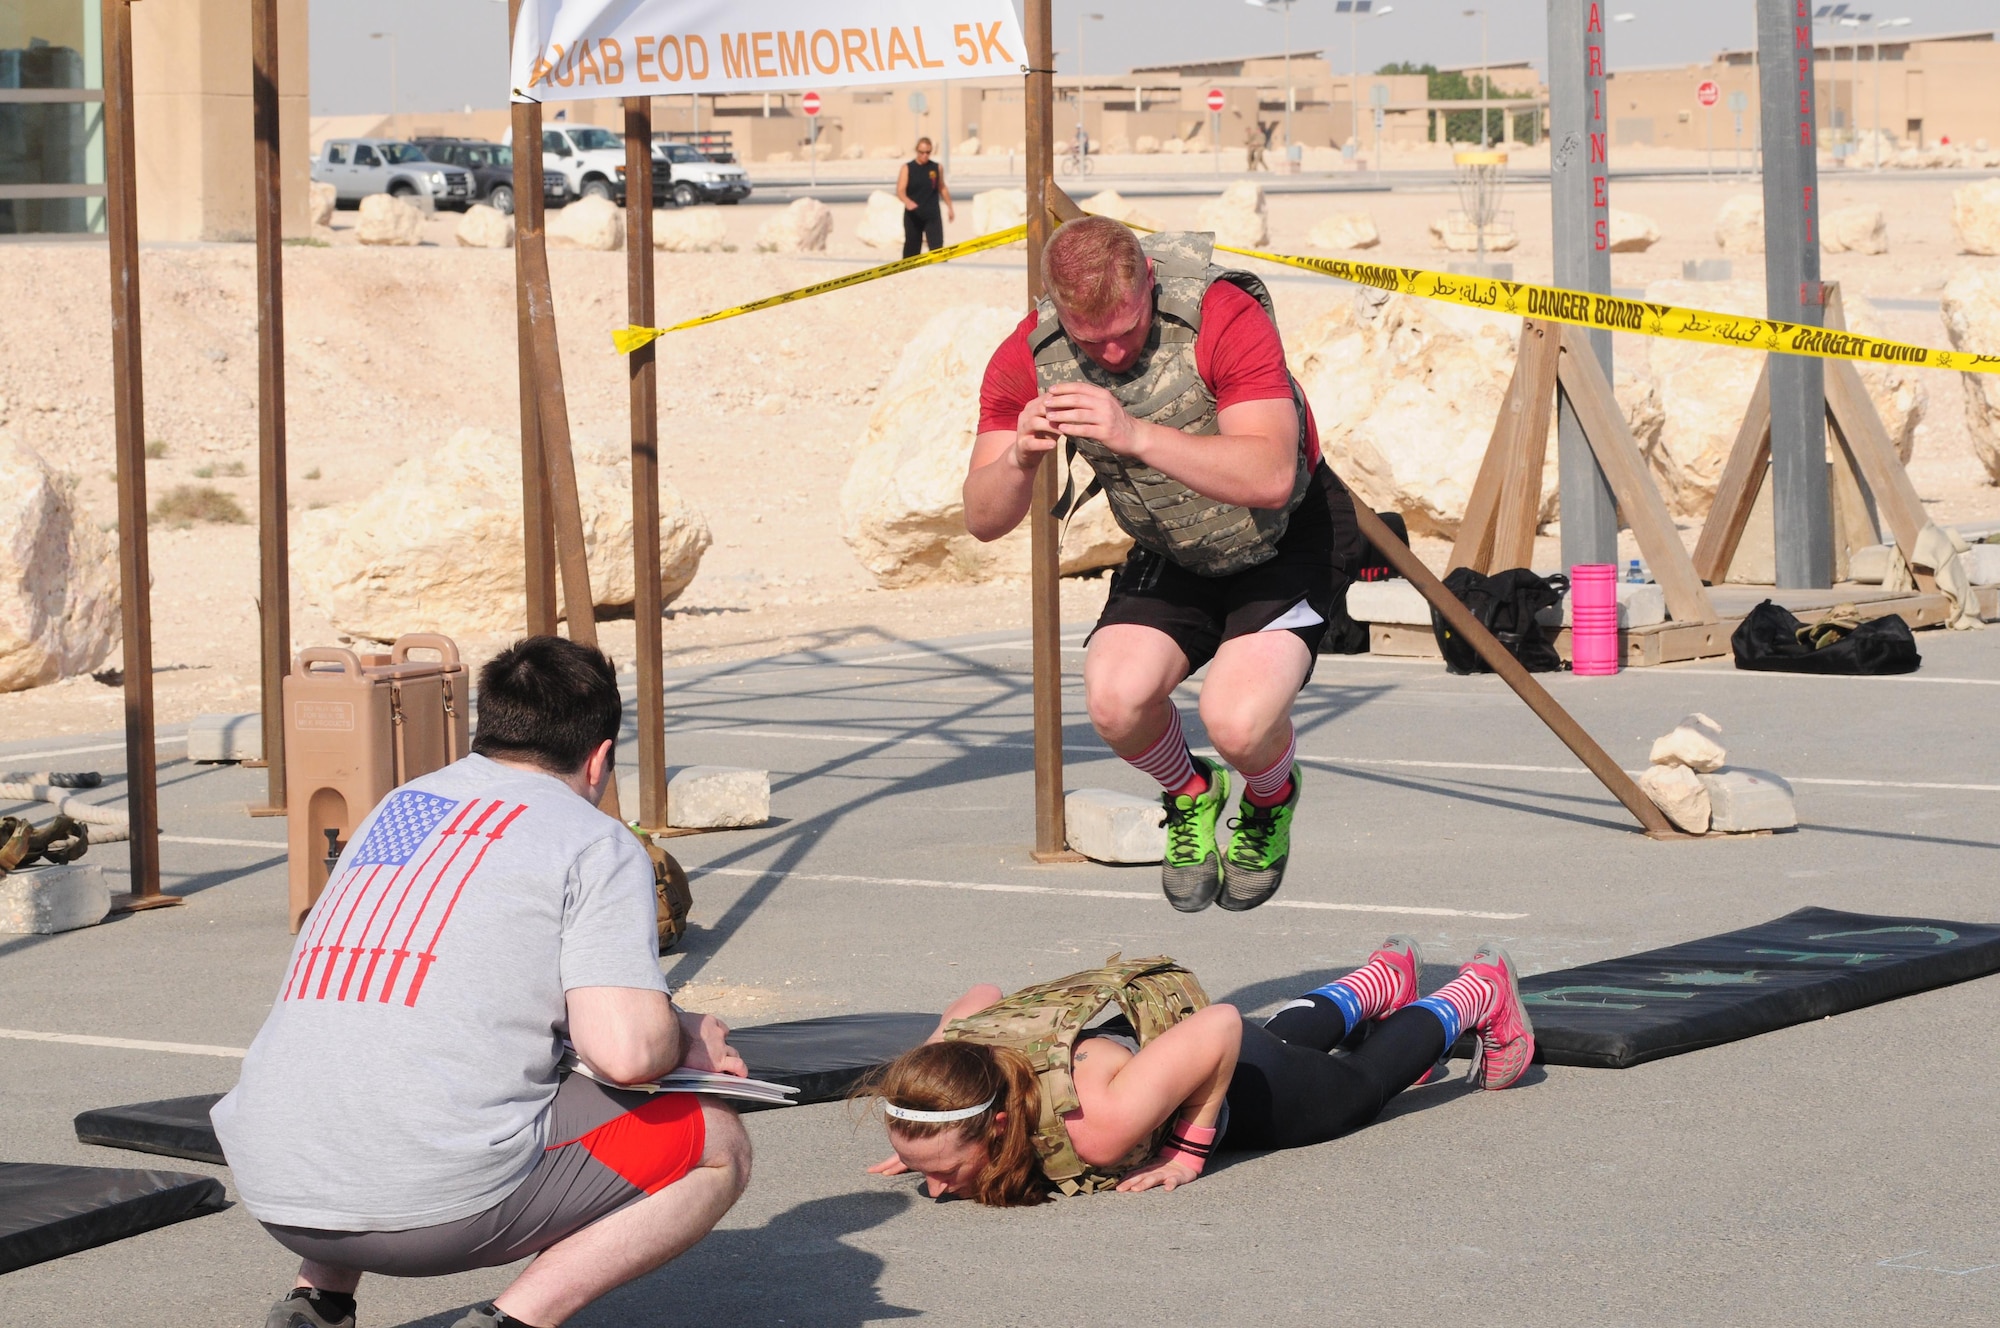 Military members worked hard to complete sets of burpees at Al Udeid Air Force Base Nov. 21. After each couplet there were 16 lateral partner over burpees. The number 16 represents 16 point hits which are automatic failures for EOD technicians in school. (U.S Air Force photo courtesy of Senior Master Sgt. Stephan Kovacs)